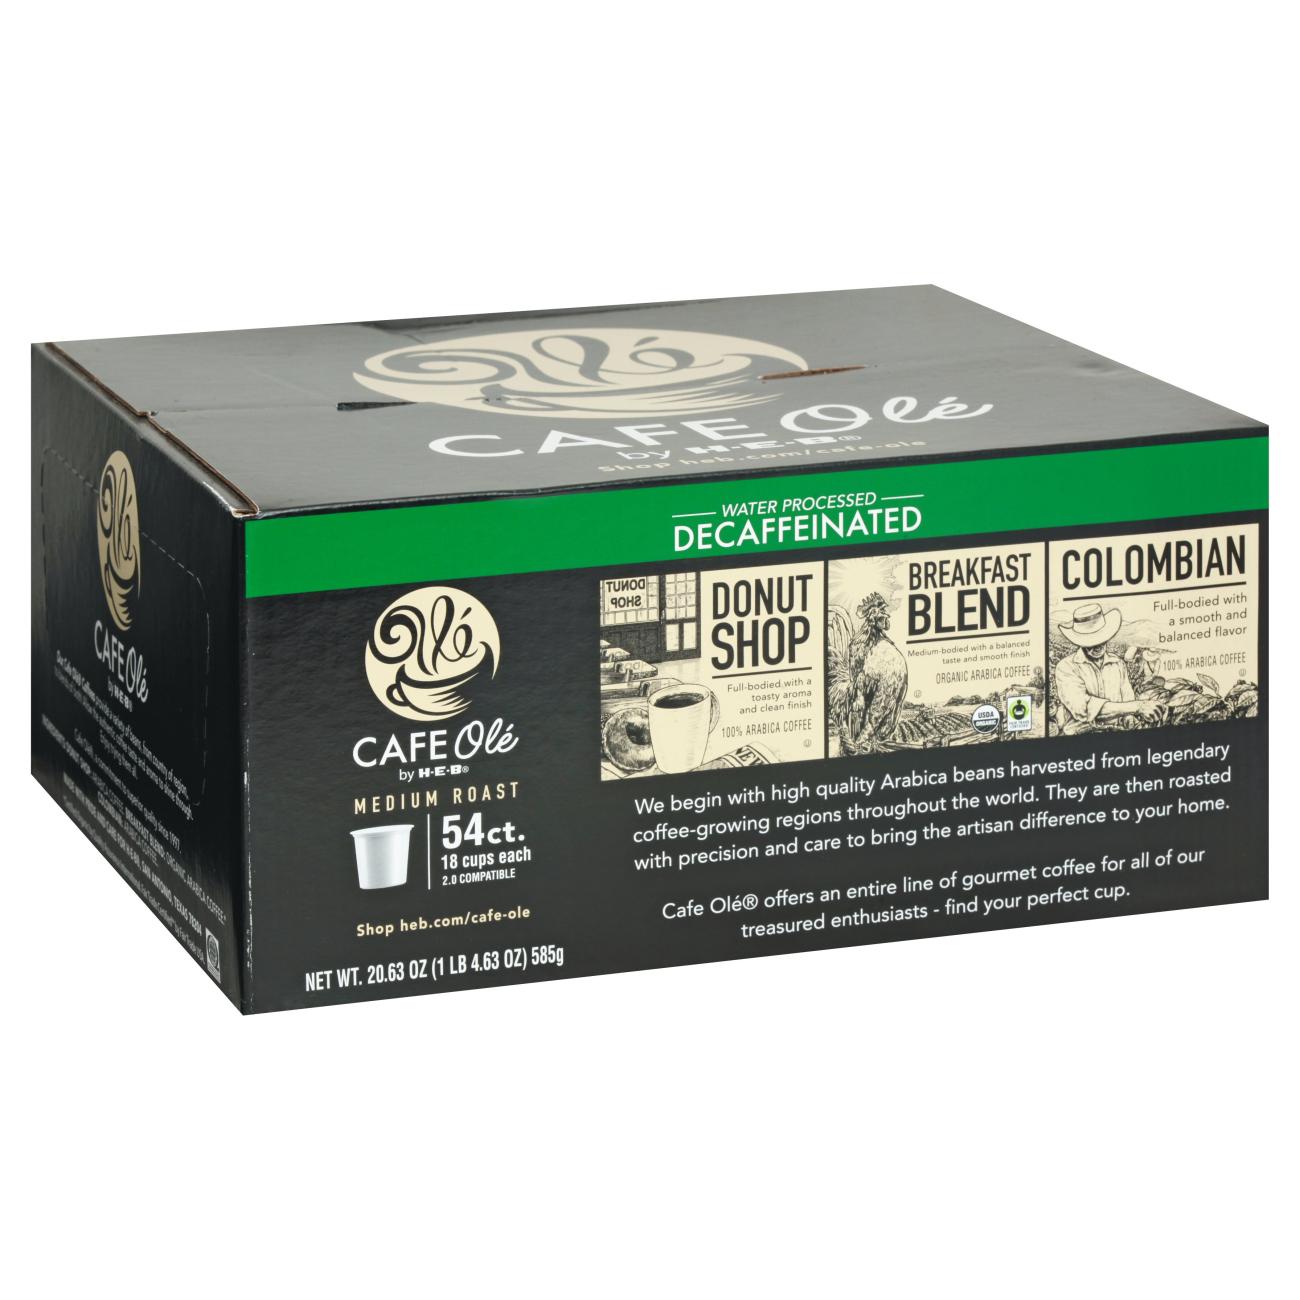 Cafe Ole Variery Pack DECAF Donut shop, Breakfast Blend, Colombian 54 Single Serve K-cups by HEB